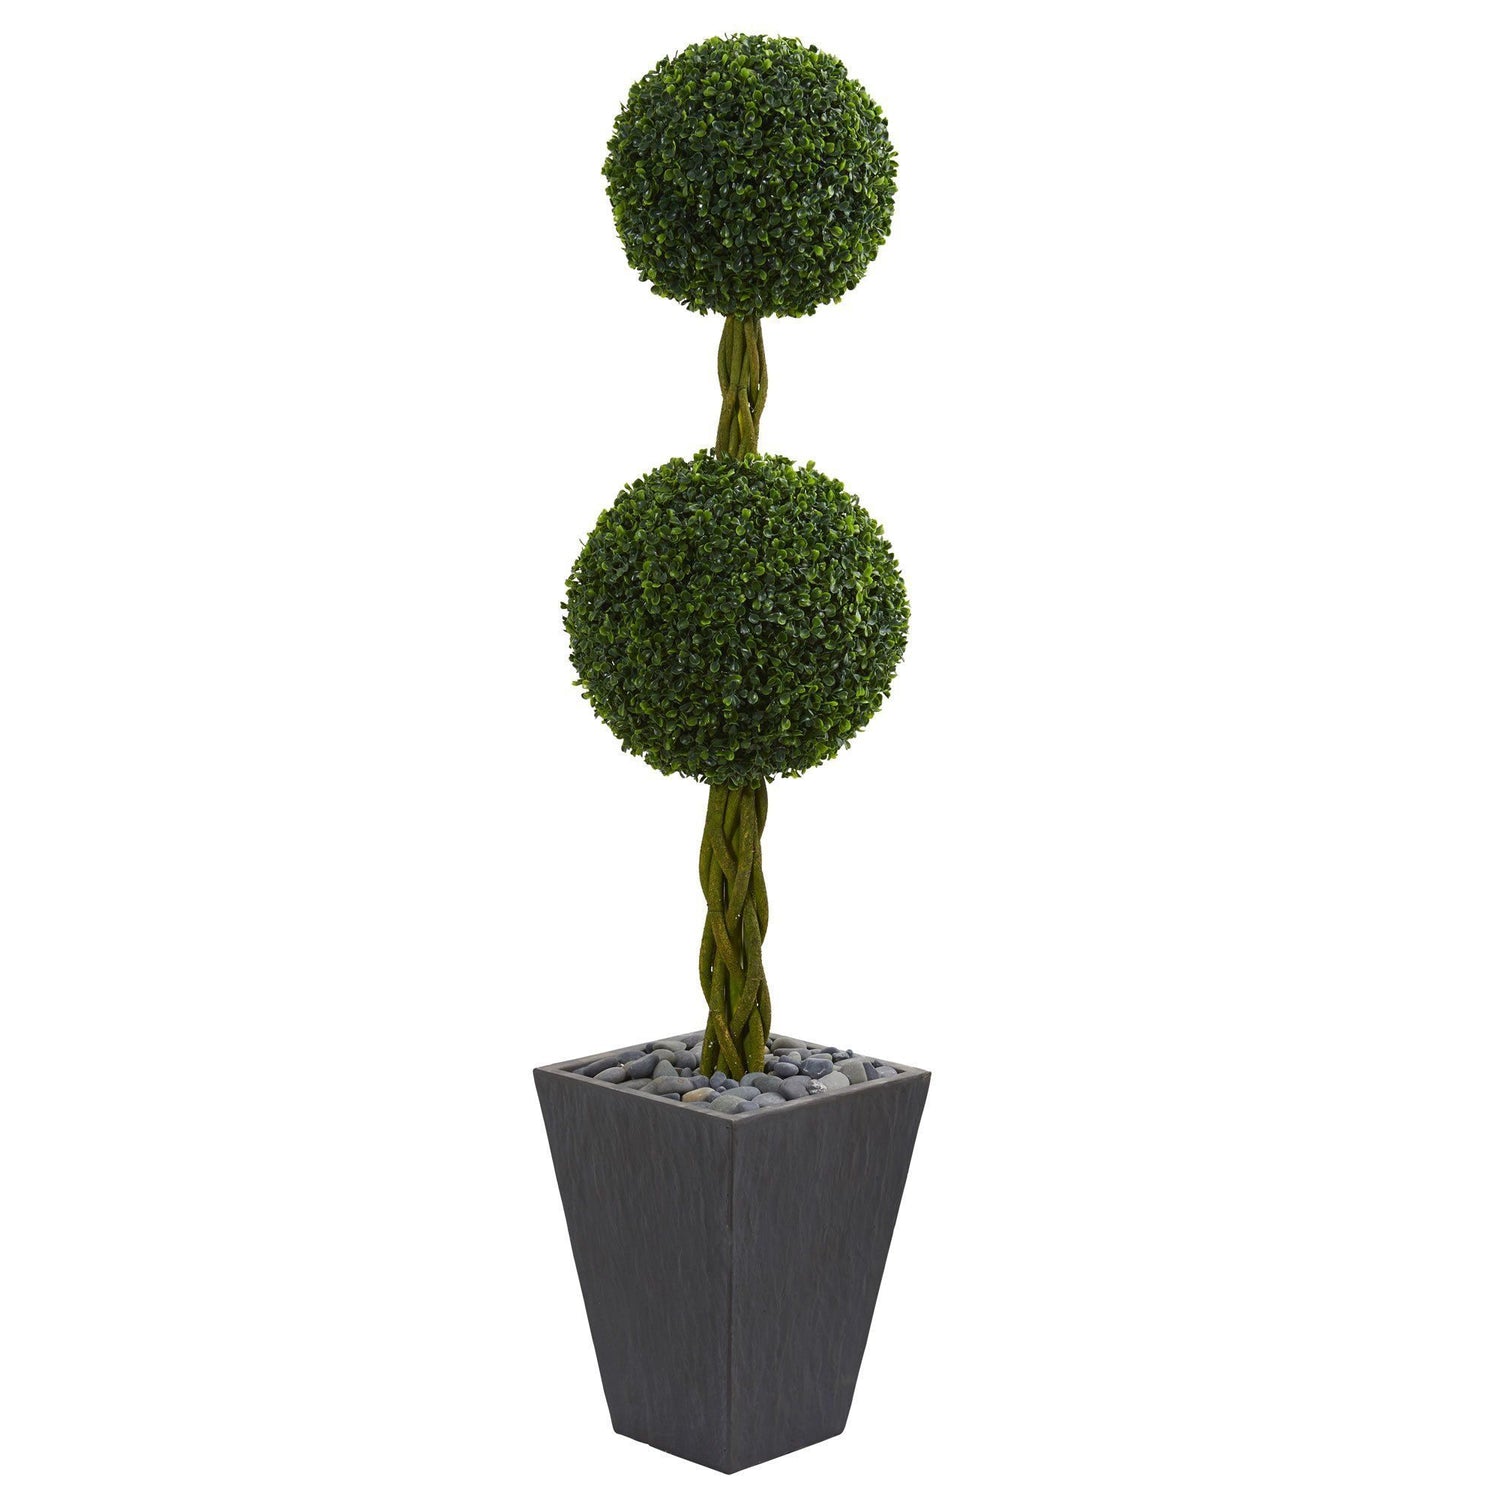 5’ Double Ball Boxwood Topiary Artificial Tree in Slate Planter(Indoor/Outdoor)